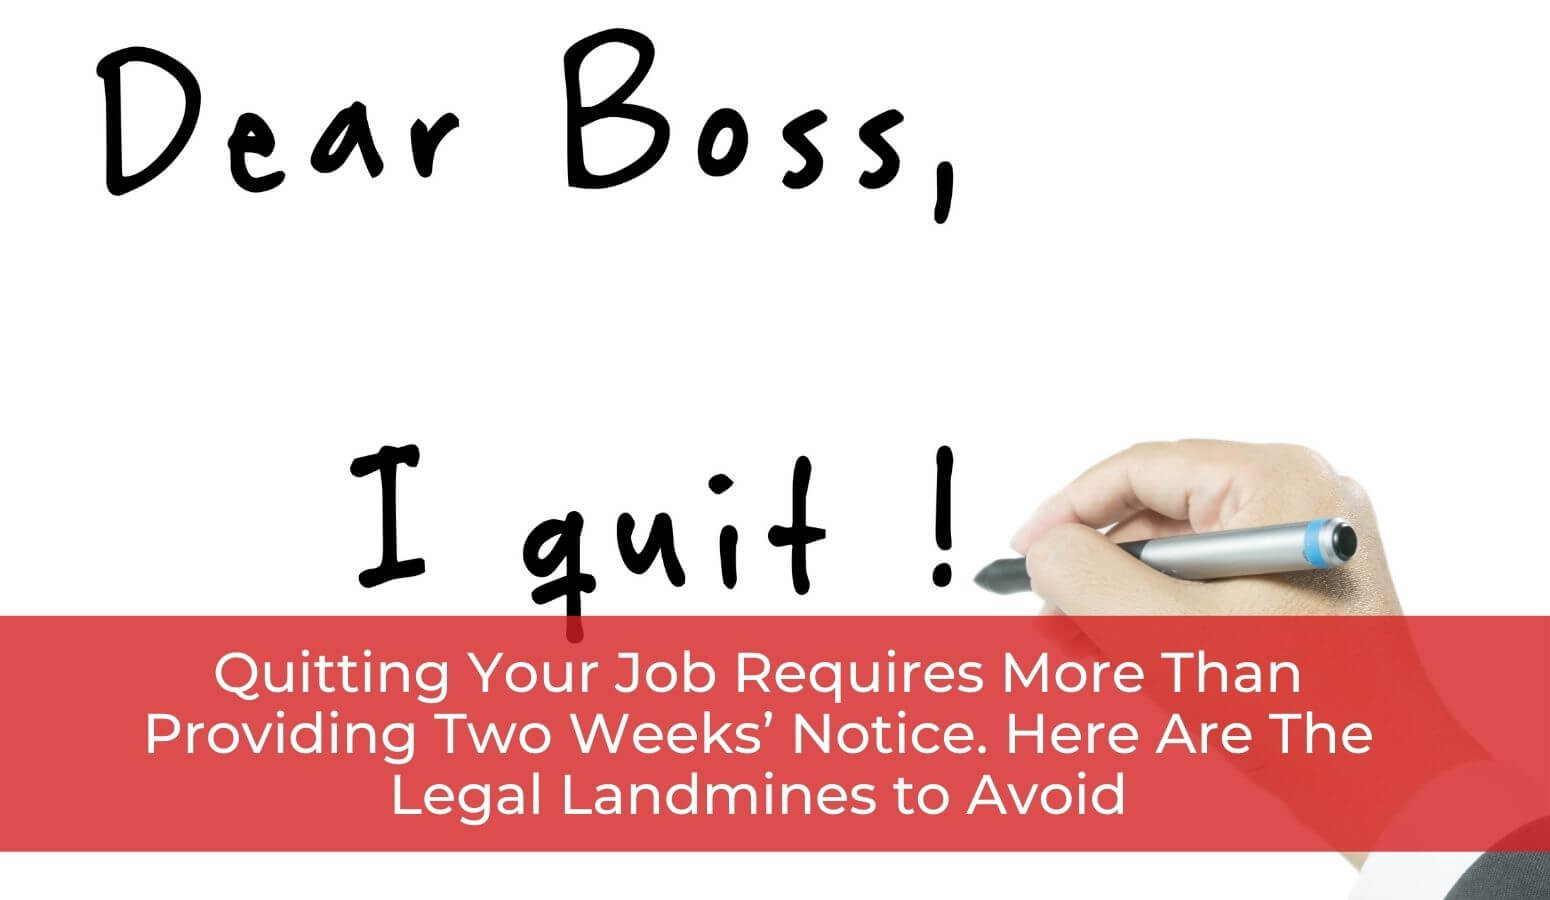 Quitting Your Job Requires More Than Providing Two Weeks Notice - April 20 - Whitten & Lublin Employment Lawyers - Toronto Employment Lawyers - Severance Package - Wrongful Dismissal